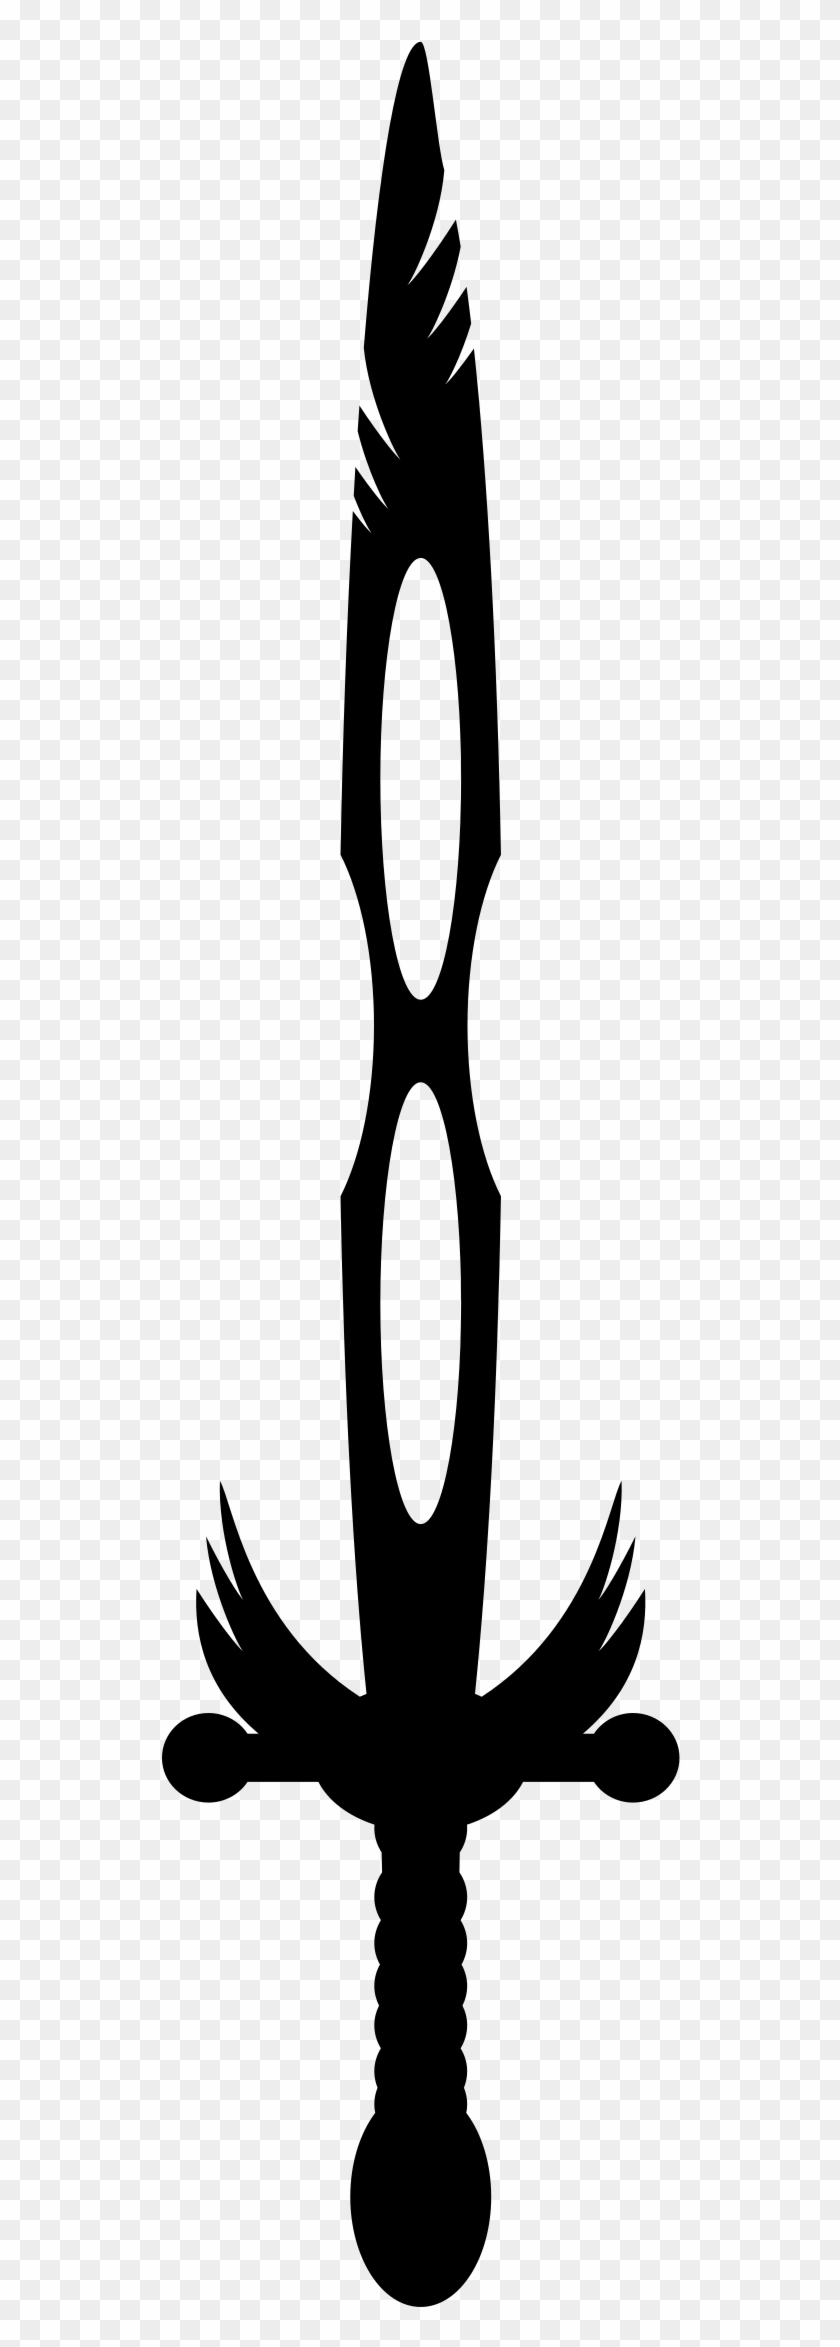 Sword Clipart Black And White - Cool Sword Black And White #255782